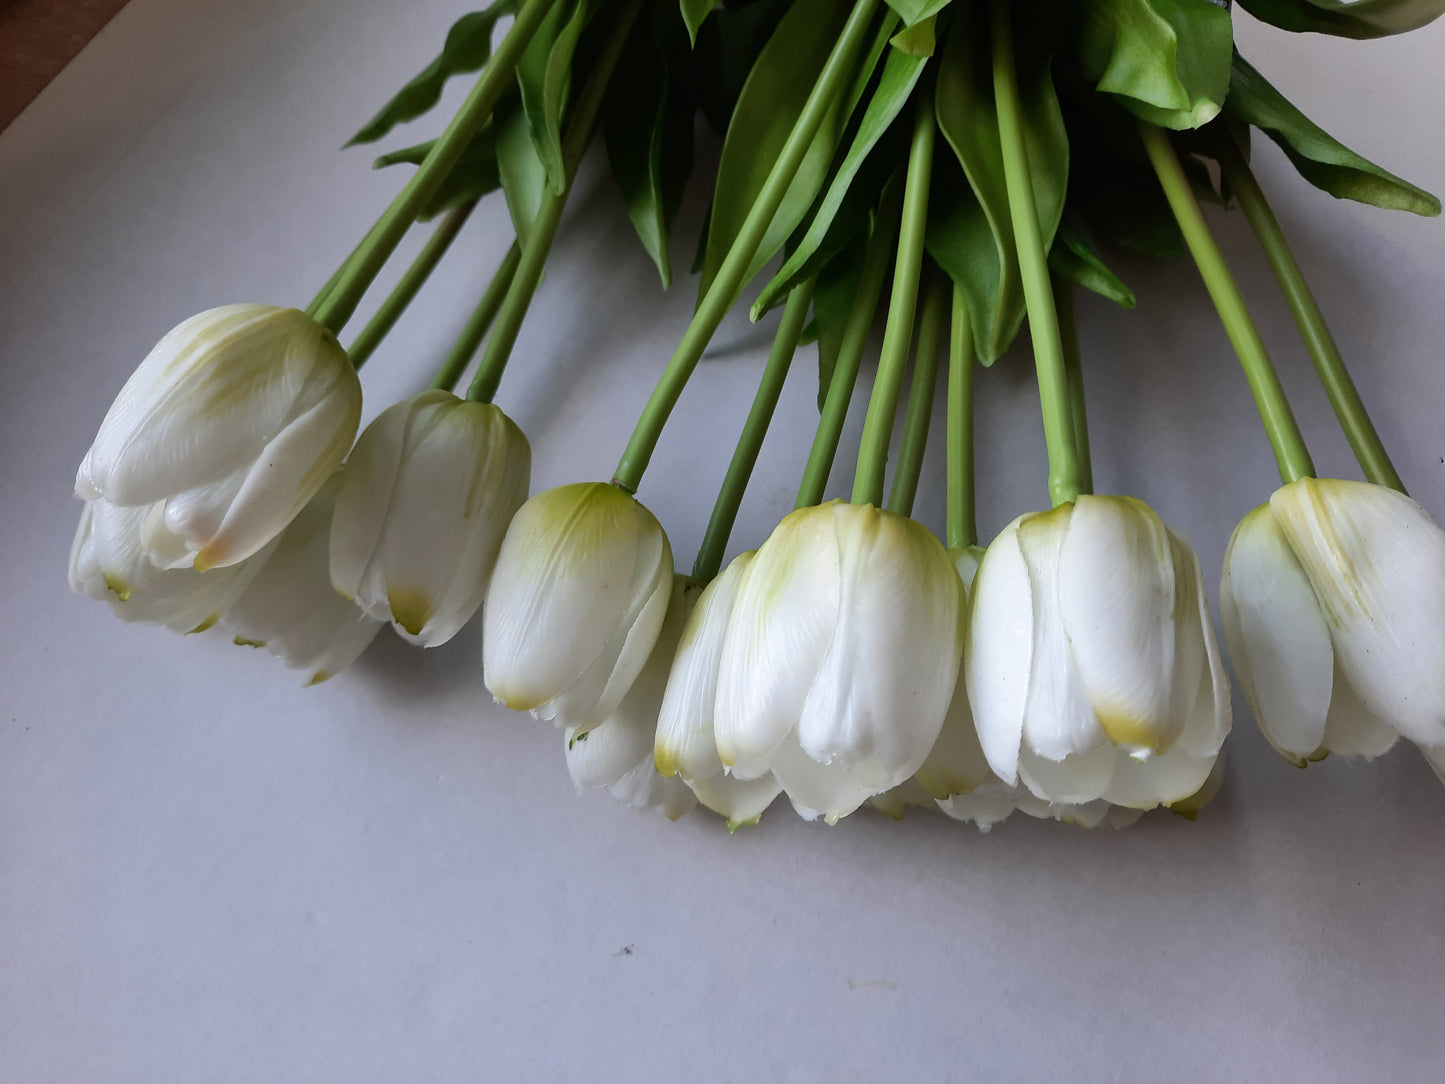 The most lifelike discount white rubber tulip artificial flower bouquet